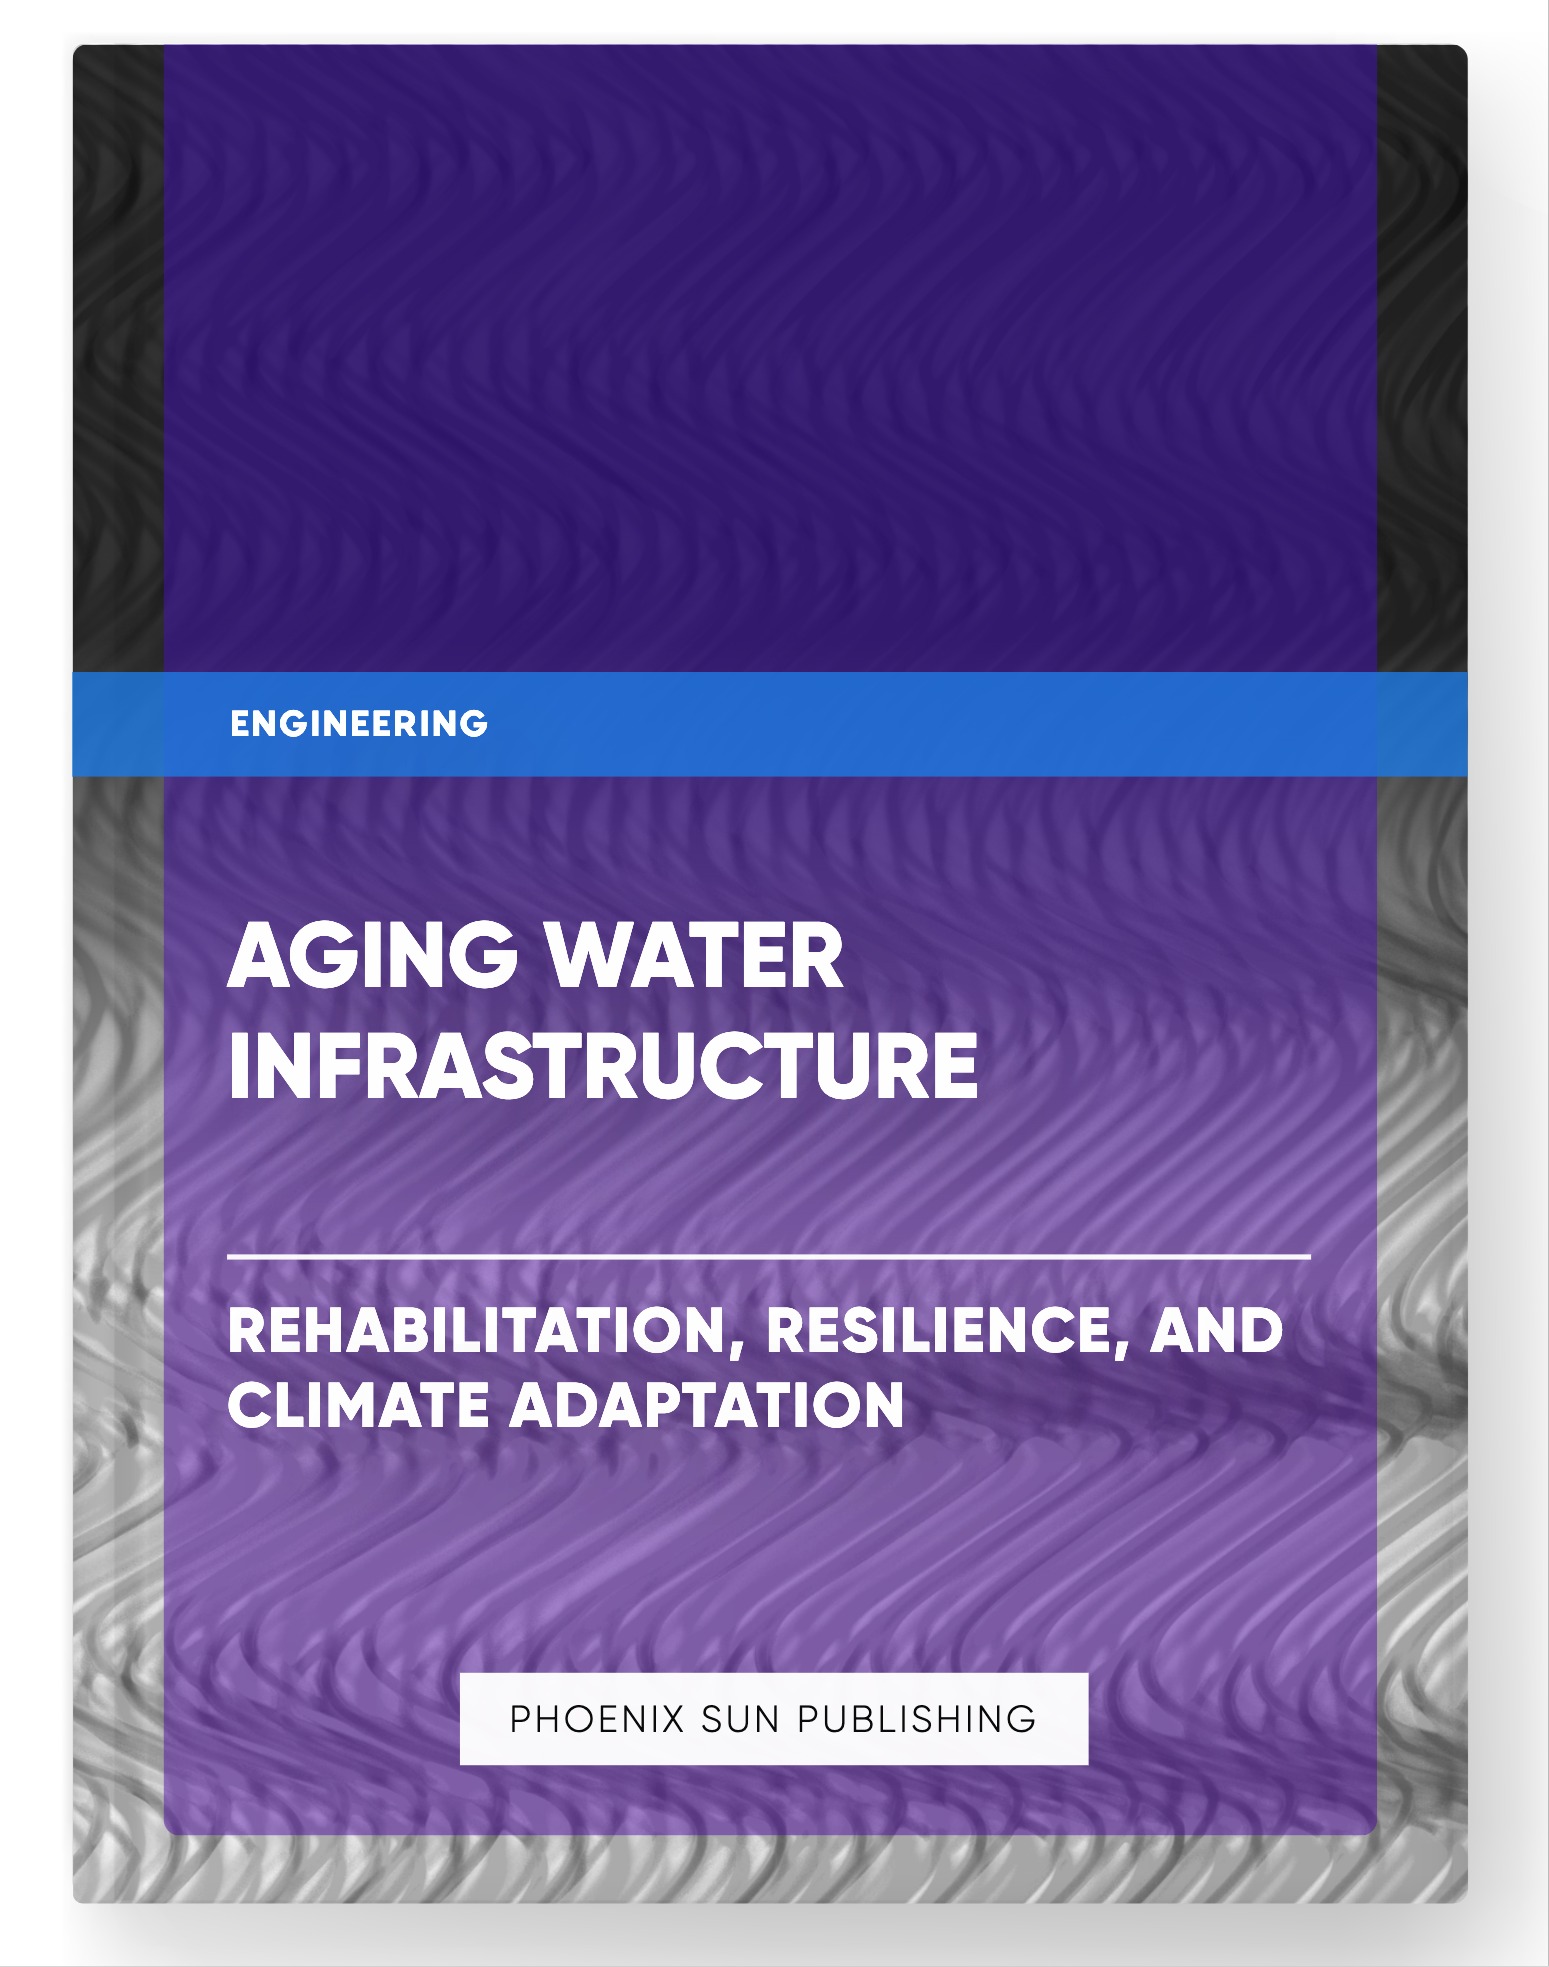 Aging Water Infrastructure – Rehabilitation, Resilience, and Climate Adaptation